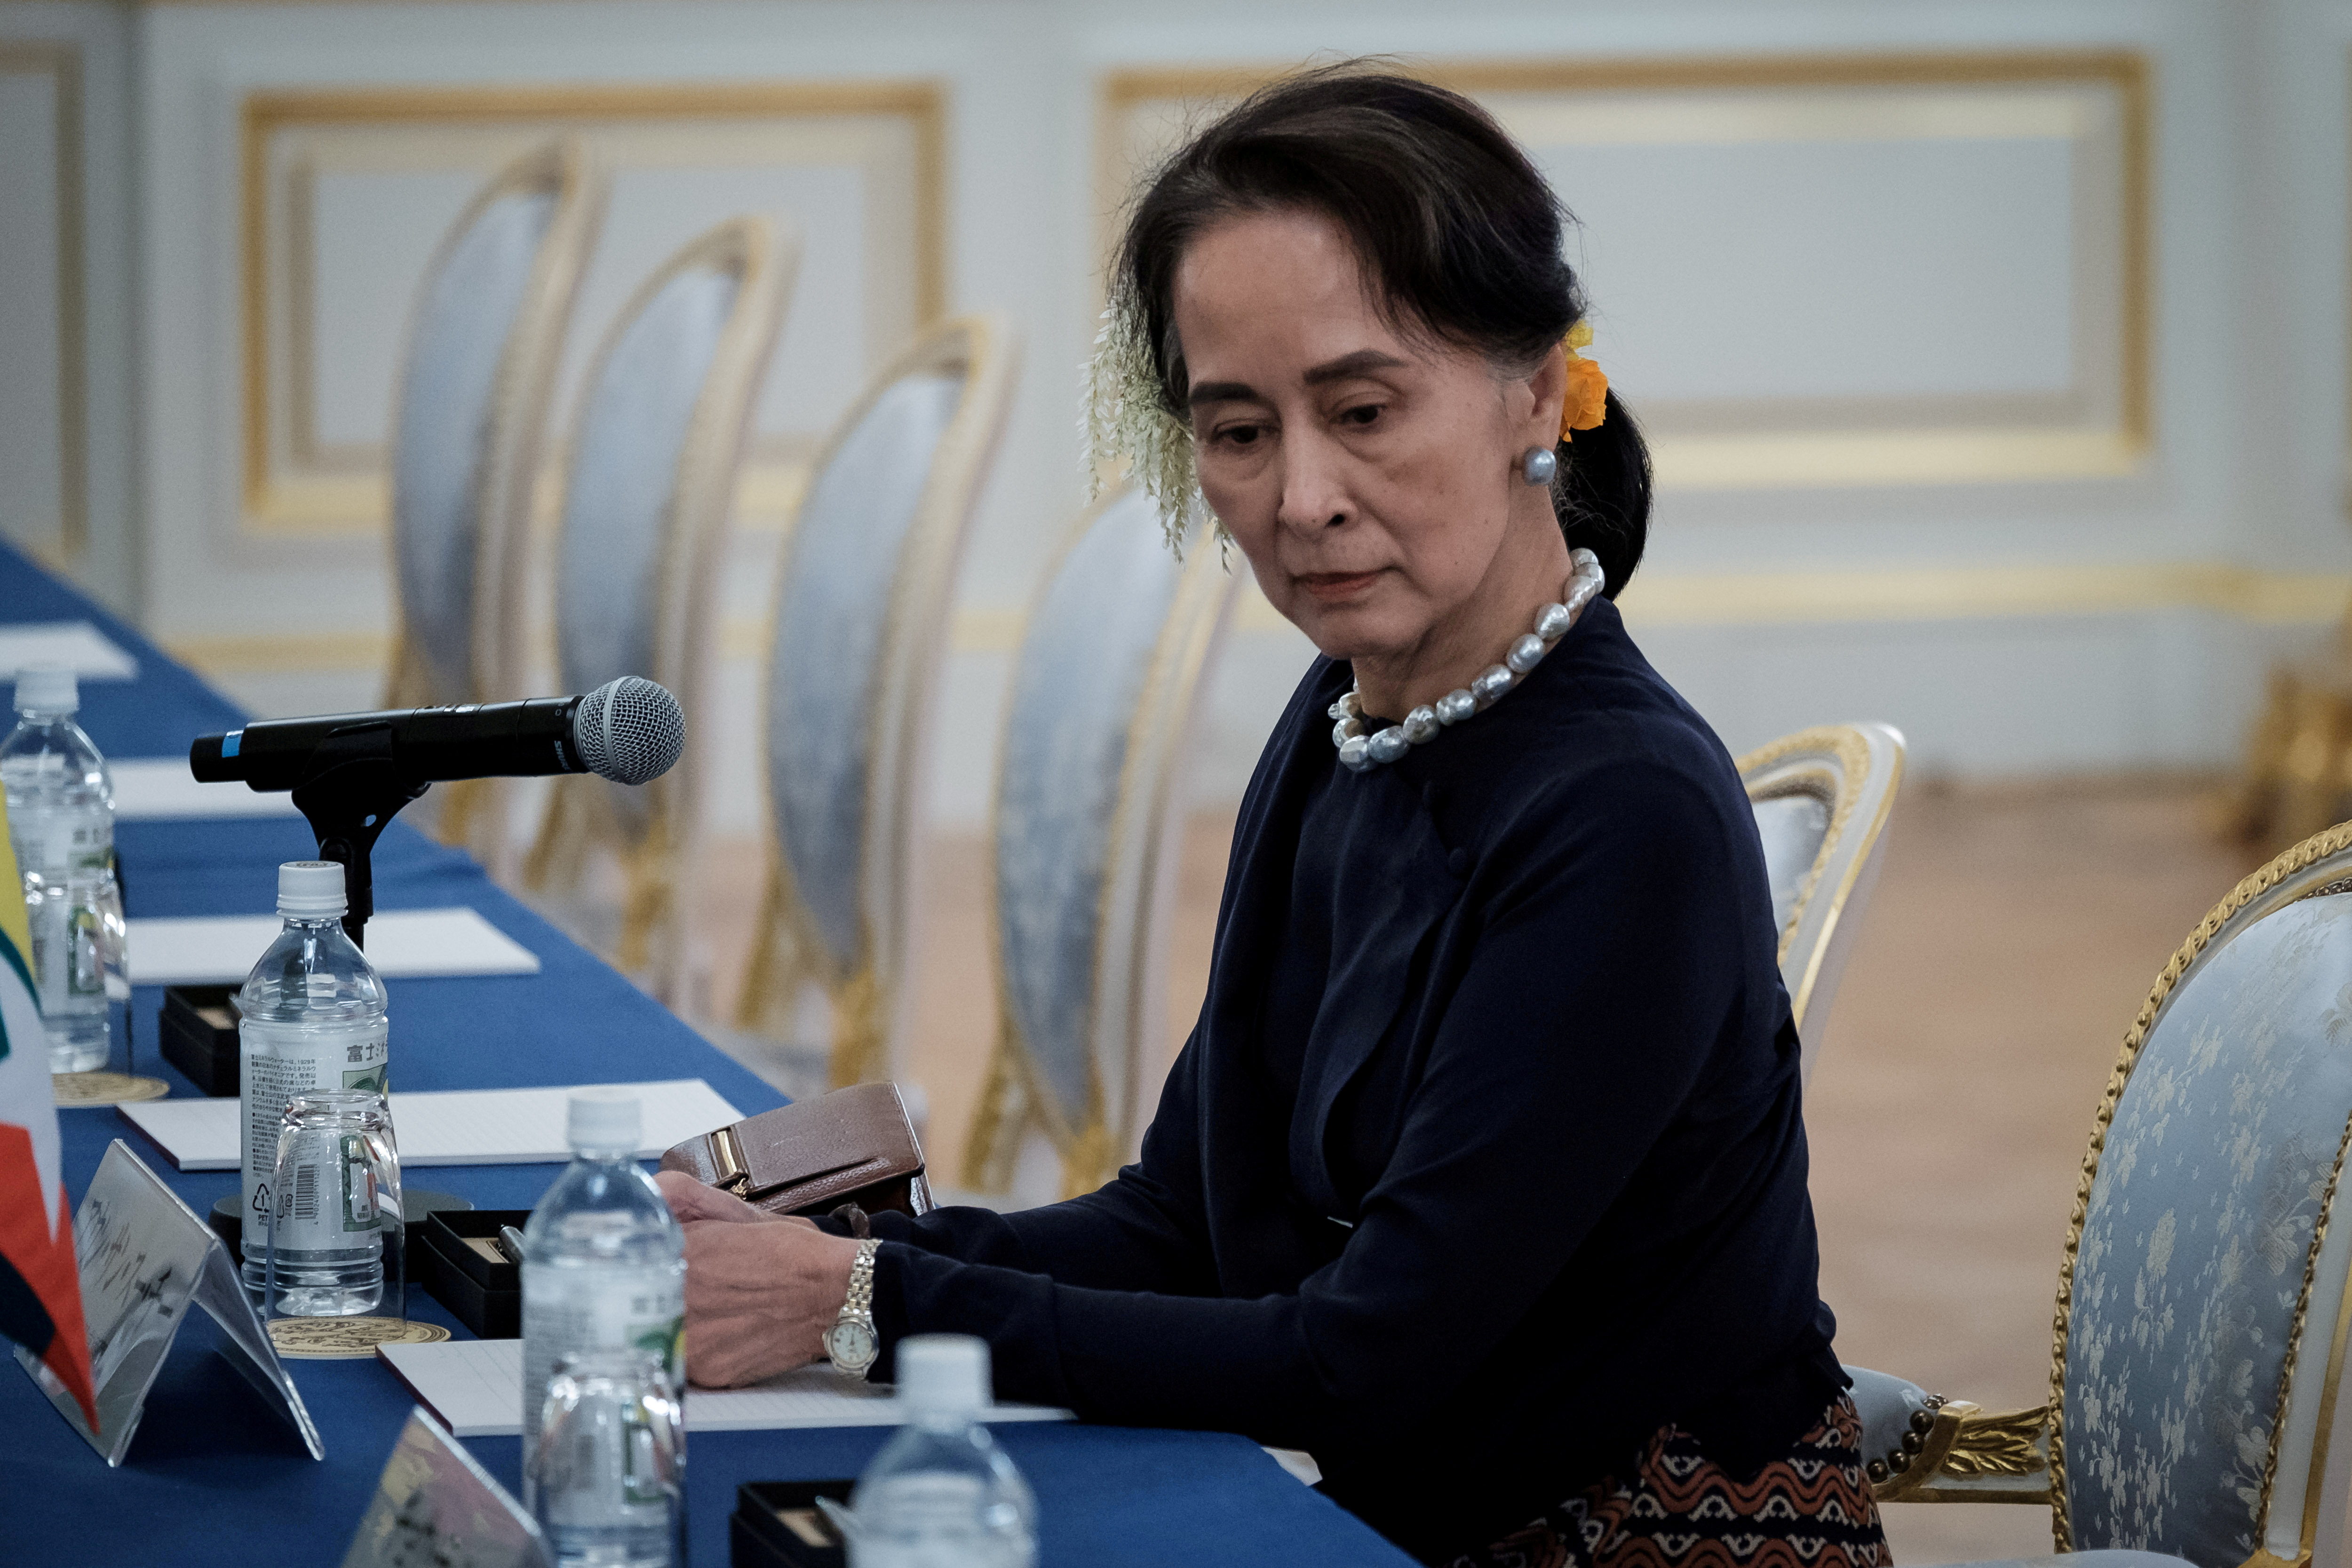 Myanmar's State Counsellor Aung San Suu Kyi waits for the arrival of her delegation before the Japan Myanmar Summit meeting with Japan's Prime Minster Shinzo Abe (not pictured) at Akasaka Palace State Guest House in Tokyo, Japan October 9, 2018.  Nicolas Datiche/Pool via Reuters